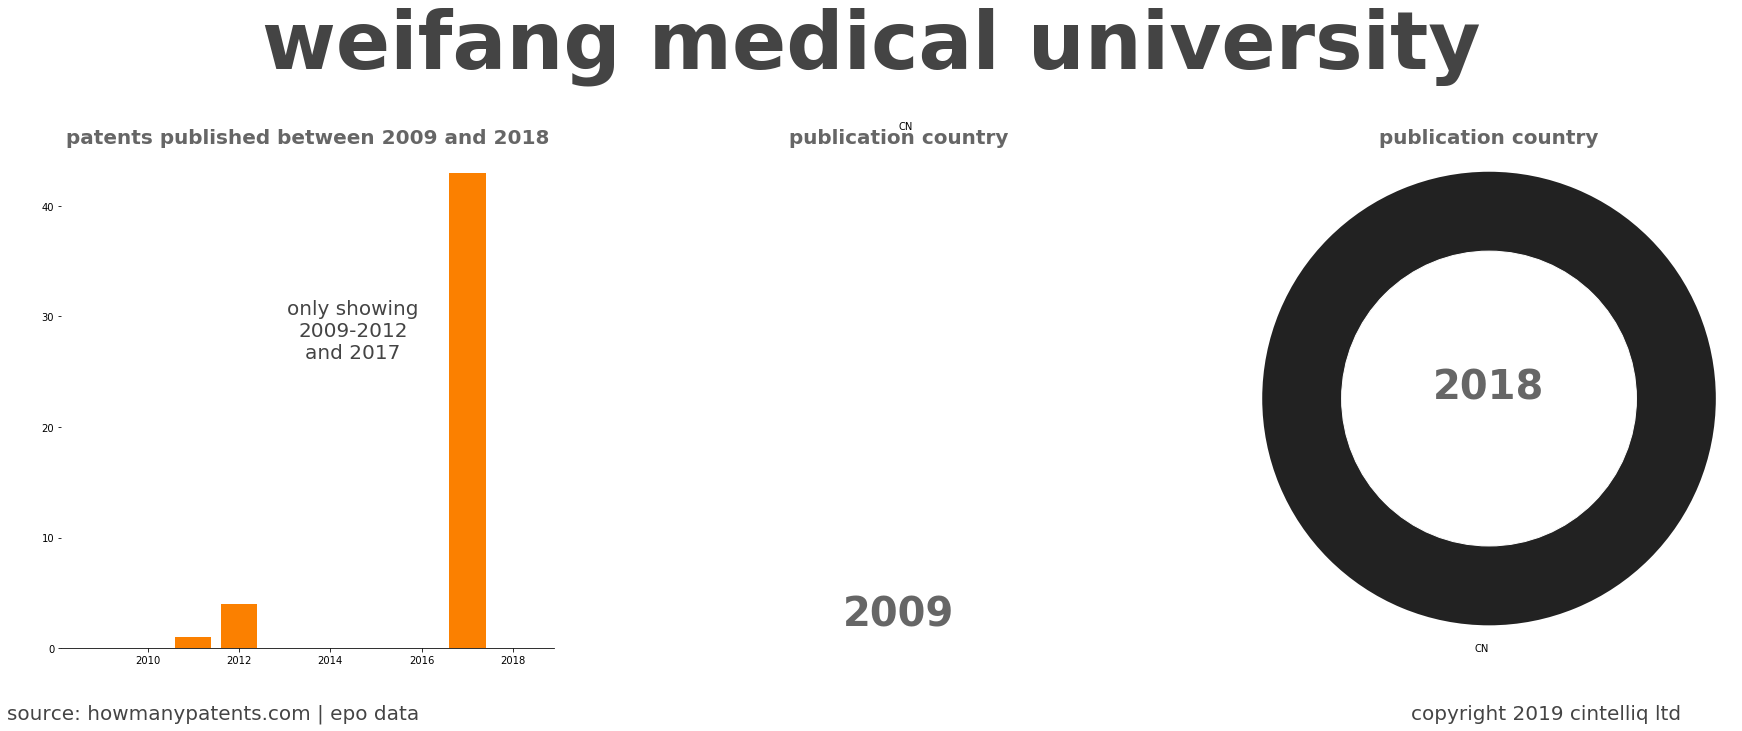 summary of patents for Weifang Medical University